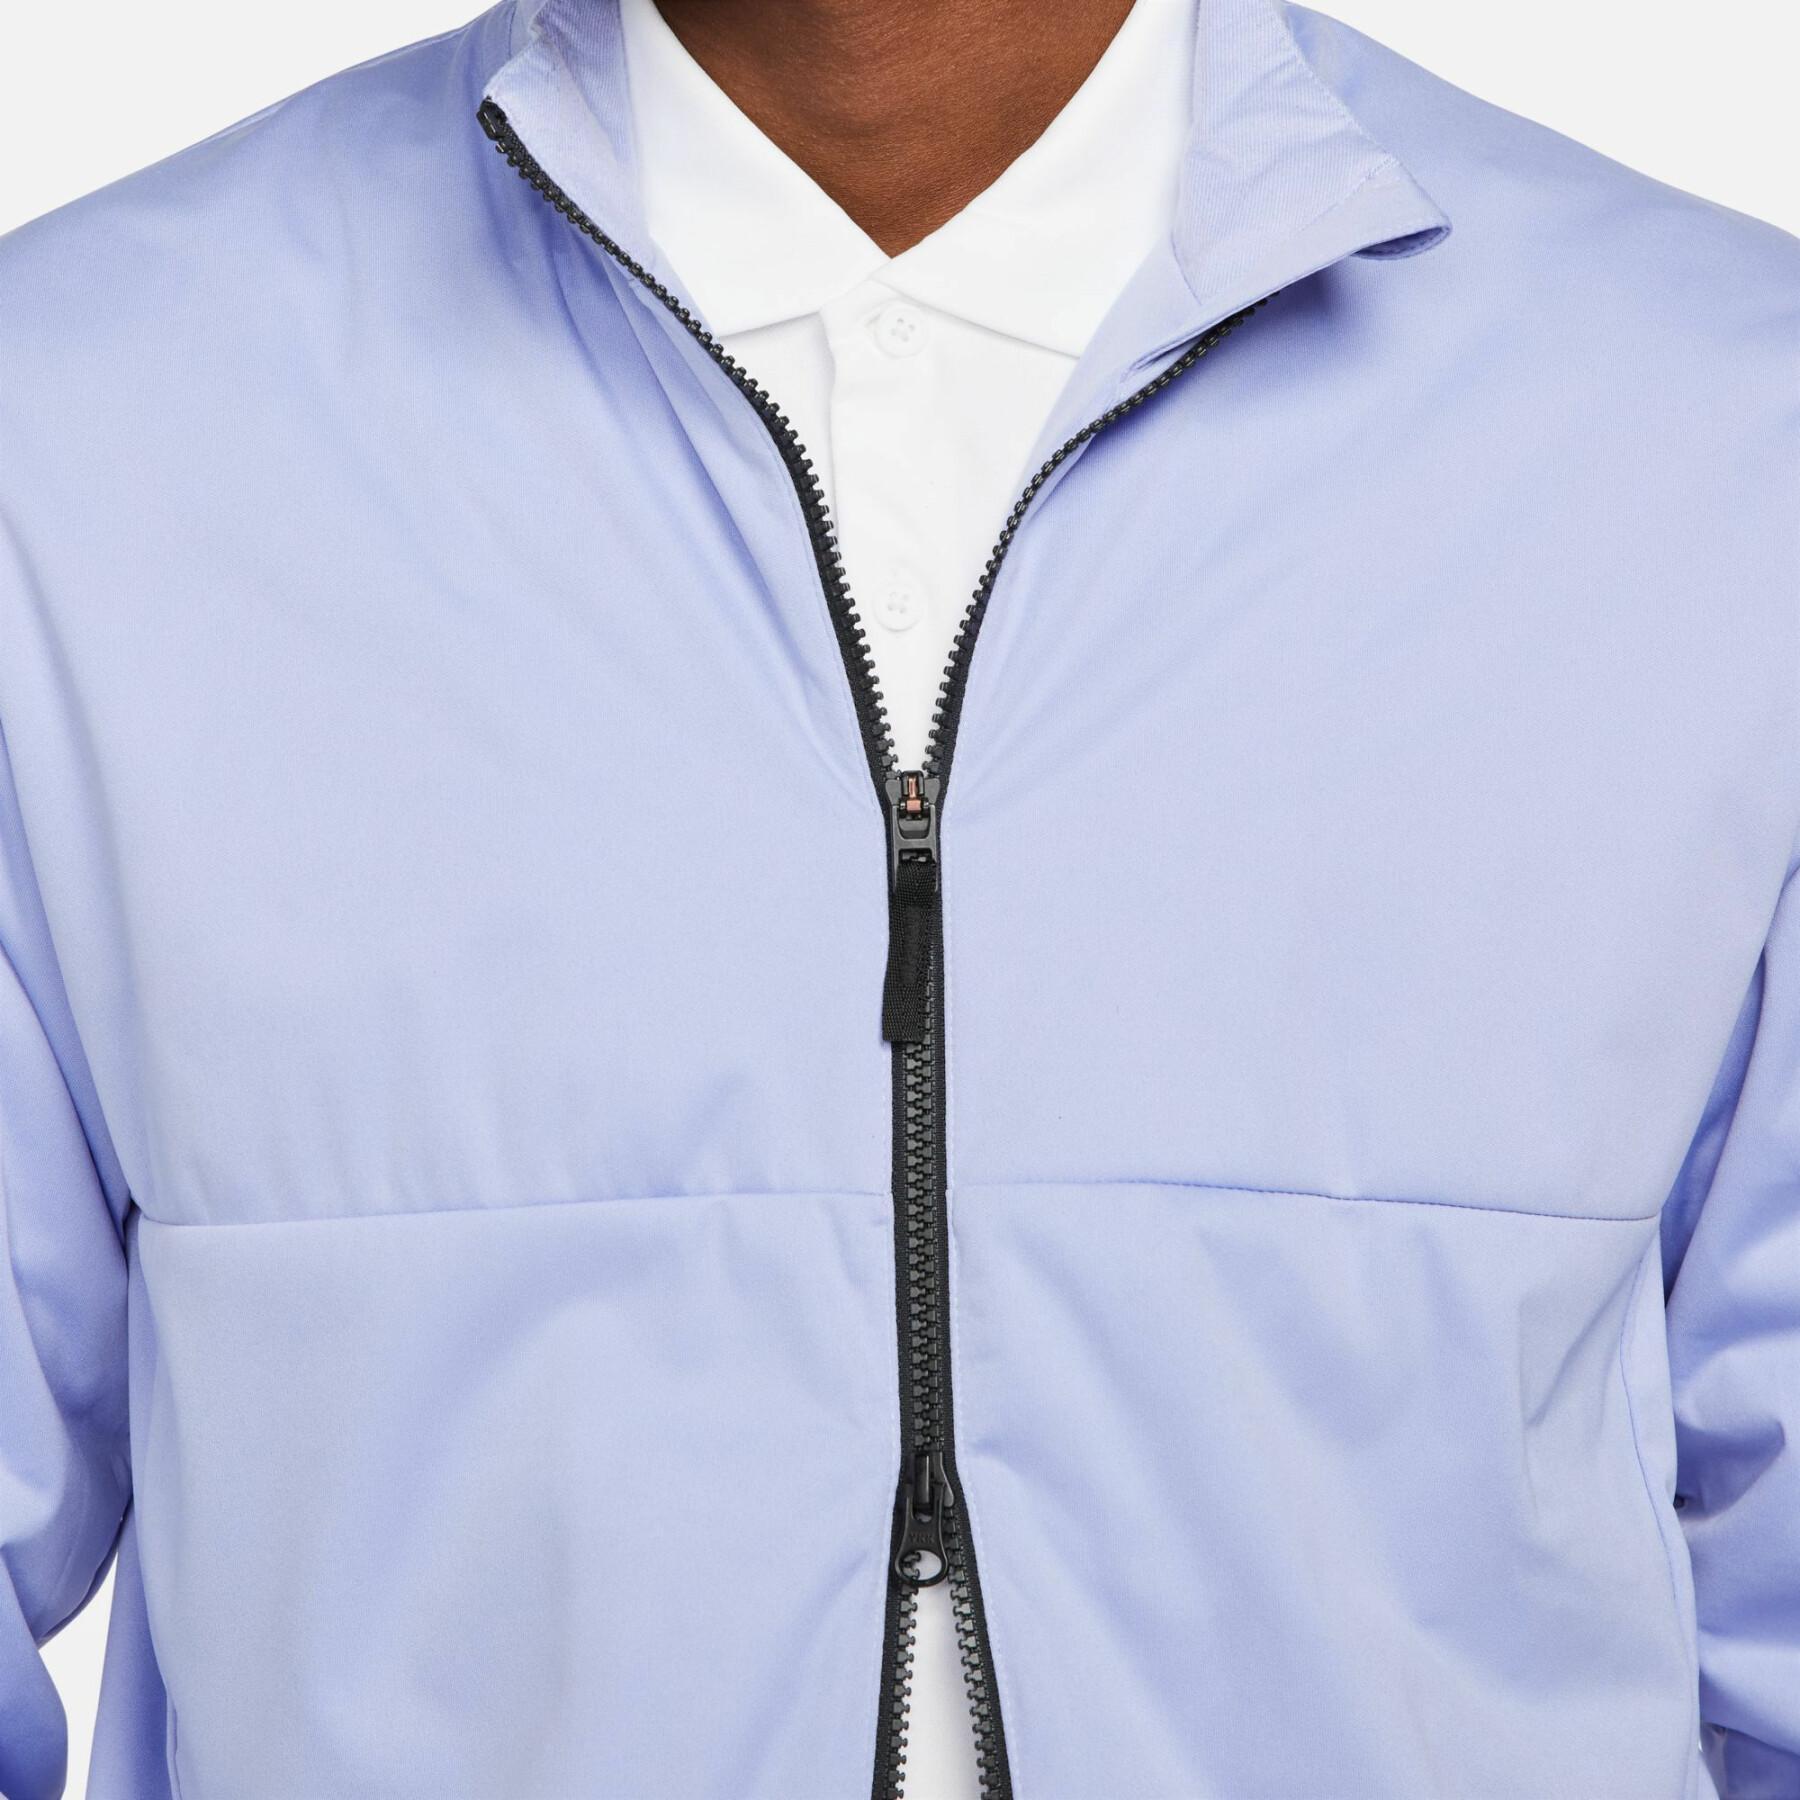 Chaqueta impermeable con cremallera Nike Storm-Fit Victory